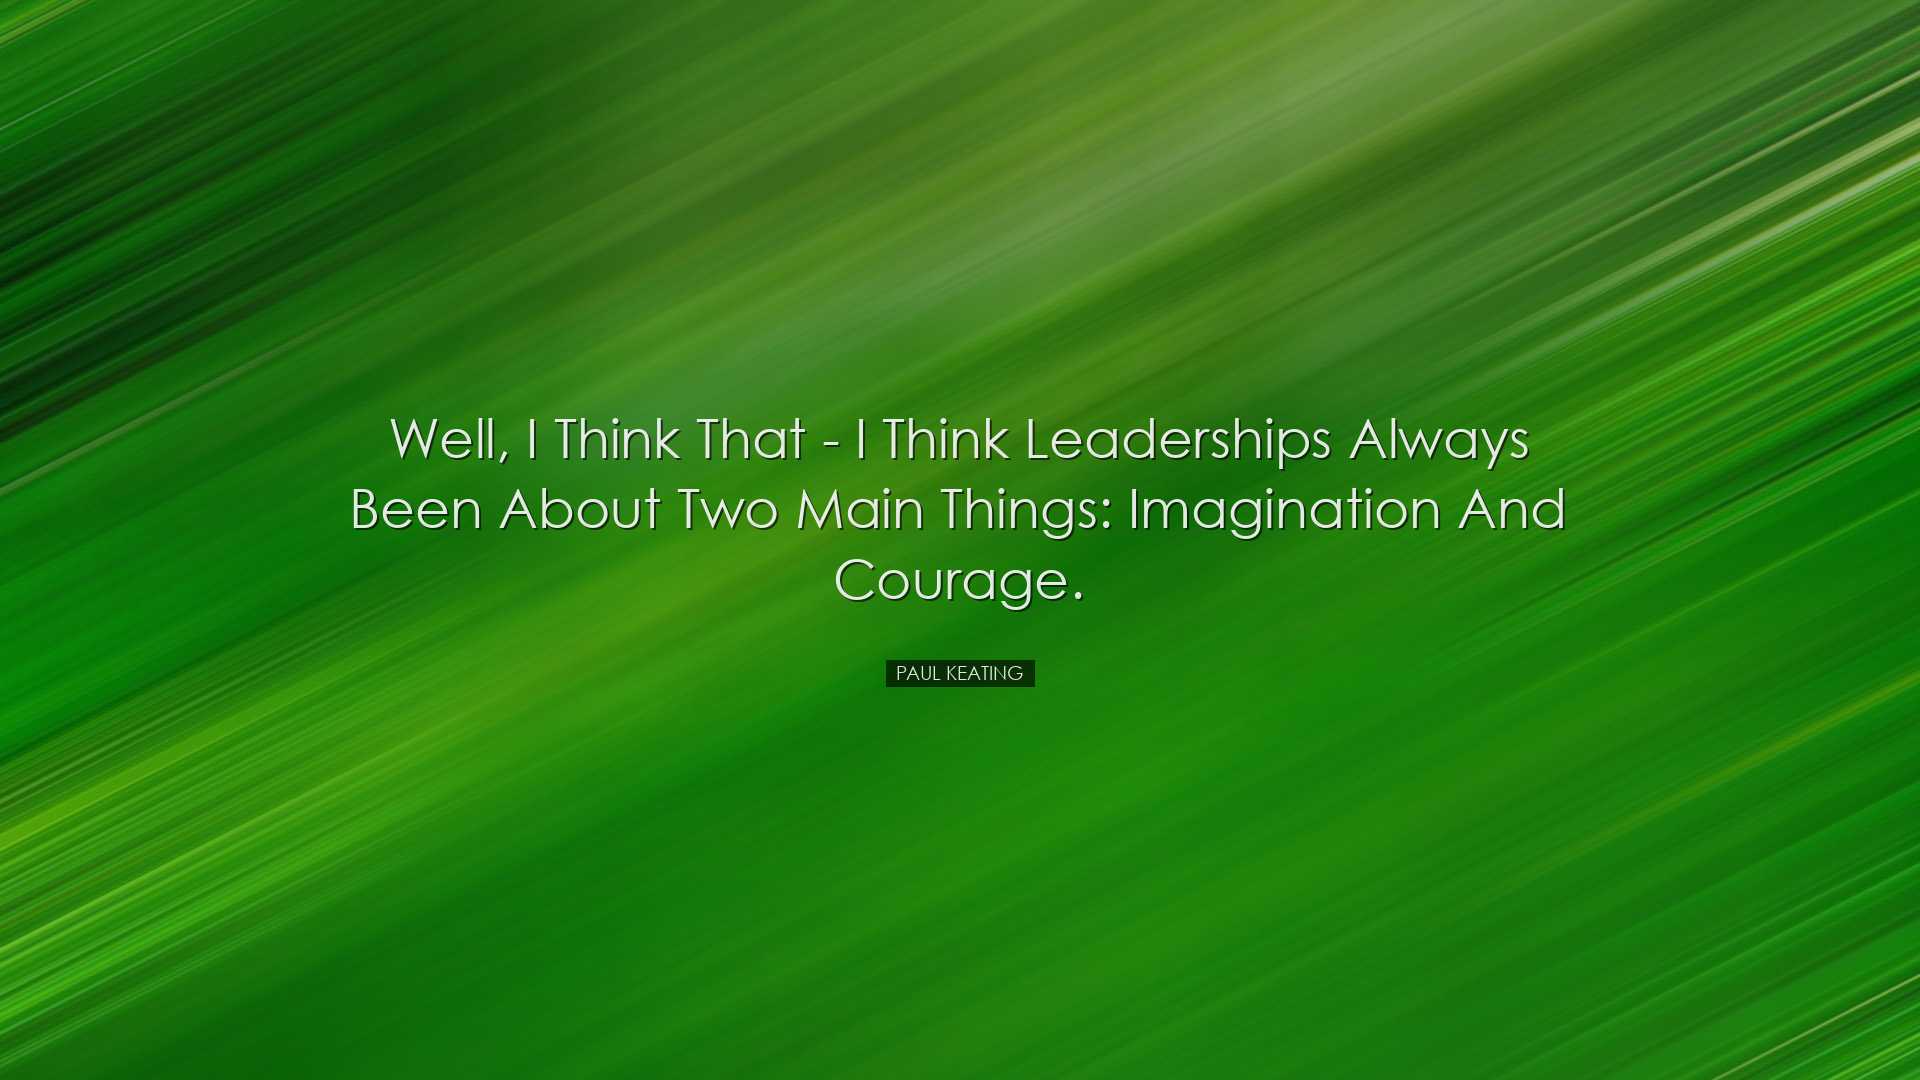 Well, I think that - I think leaderships always been about two mai